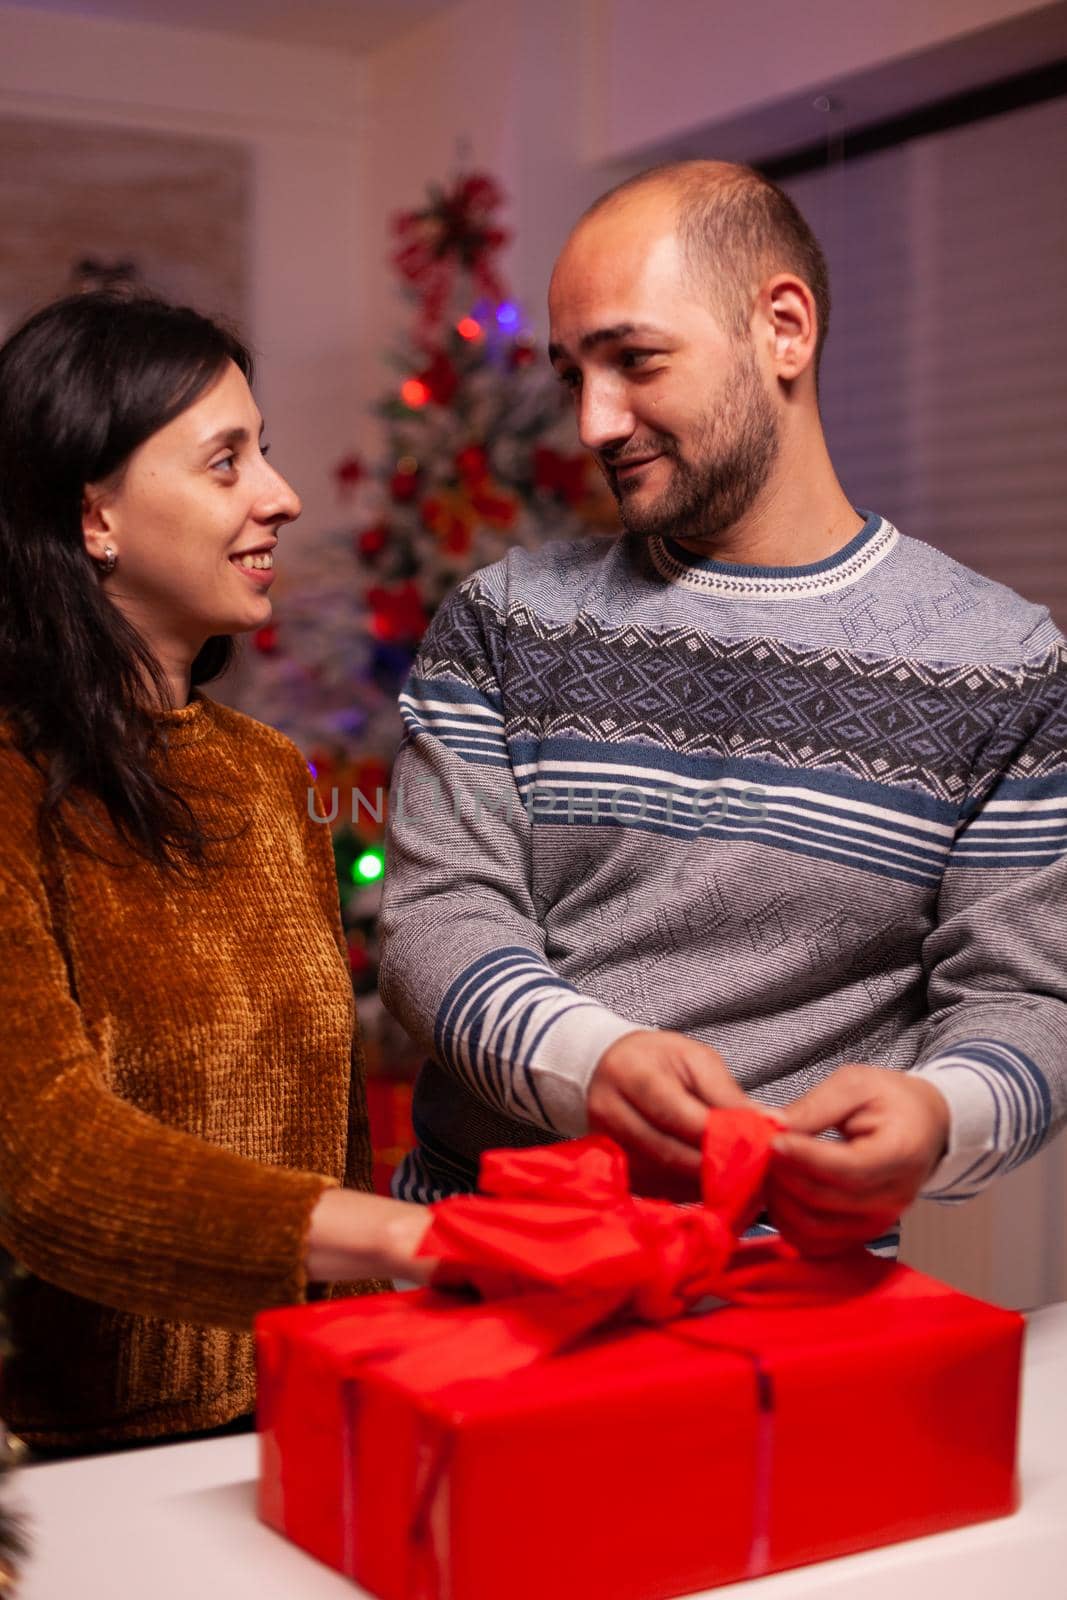 Cheerful family opening xmas decorated gift with ribbon on it during christmas holiday standing in x-mas kitchen. Happy couple married celebrating winter season. Santa-claus tradition